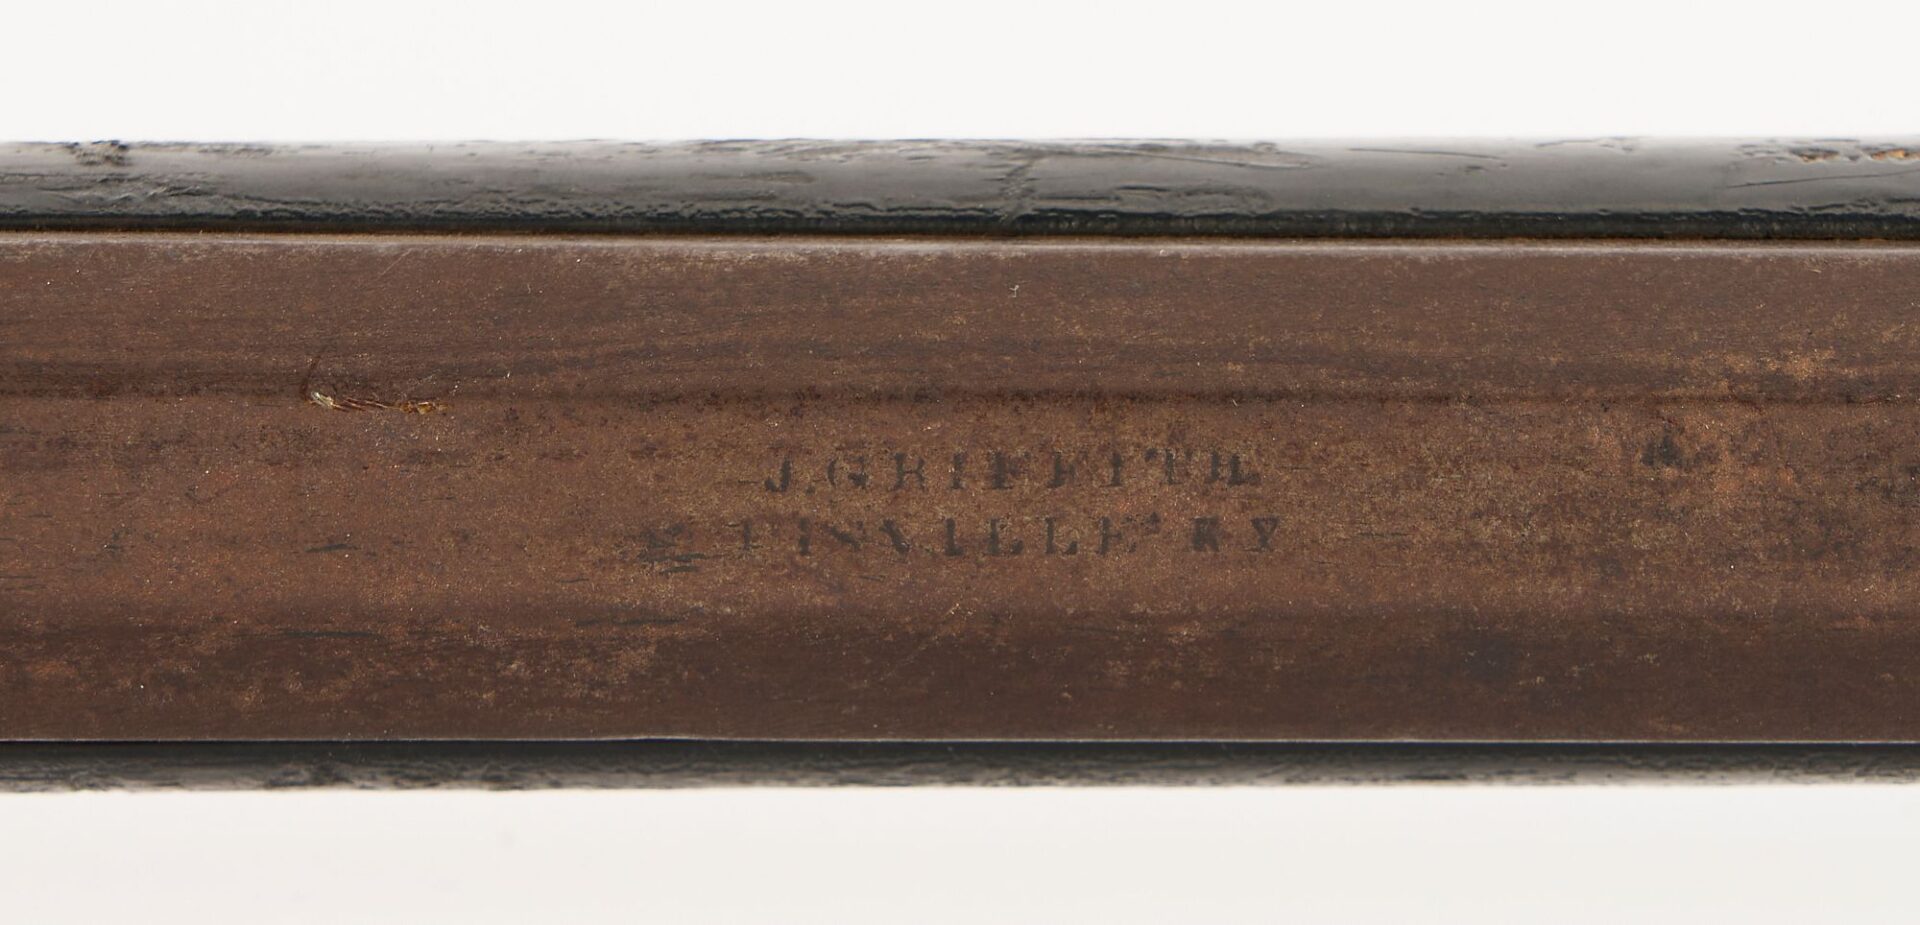 Lot 533: Kentucky Half Stock .36 cal. Percussion Rifle; J. Griffith, Louisville